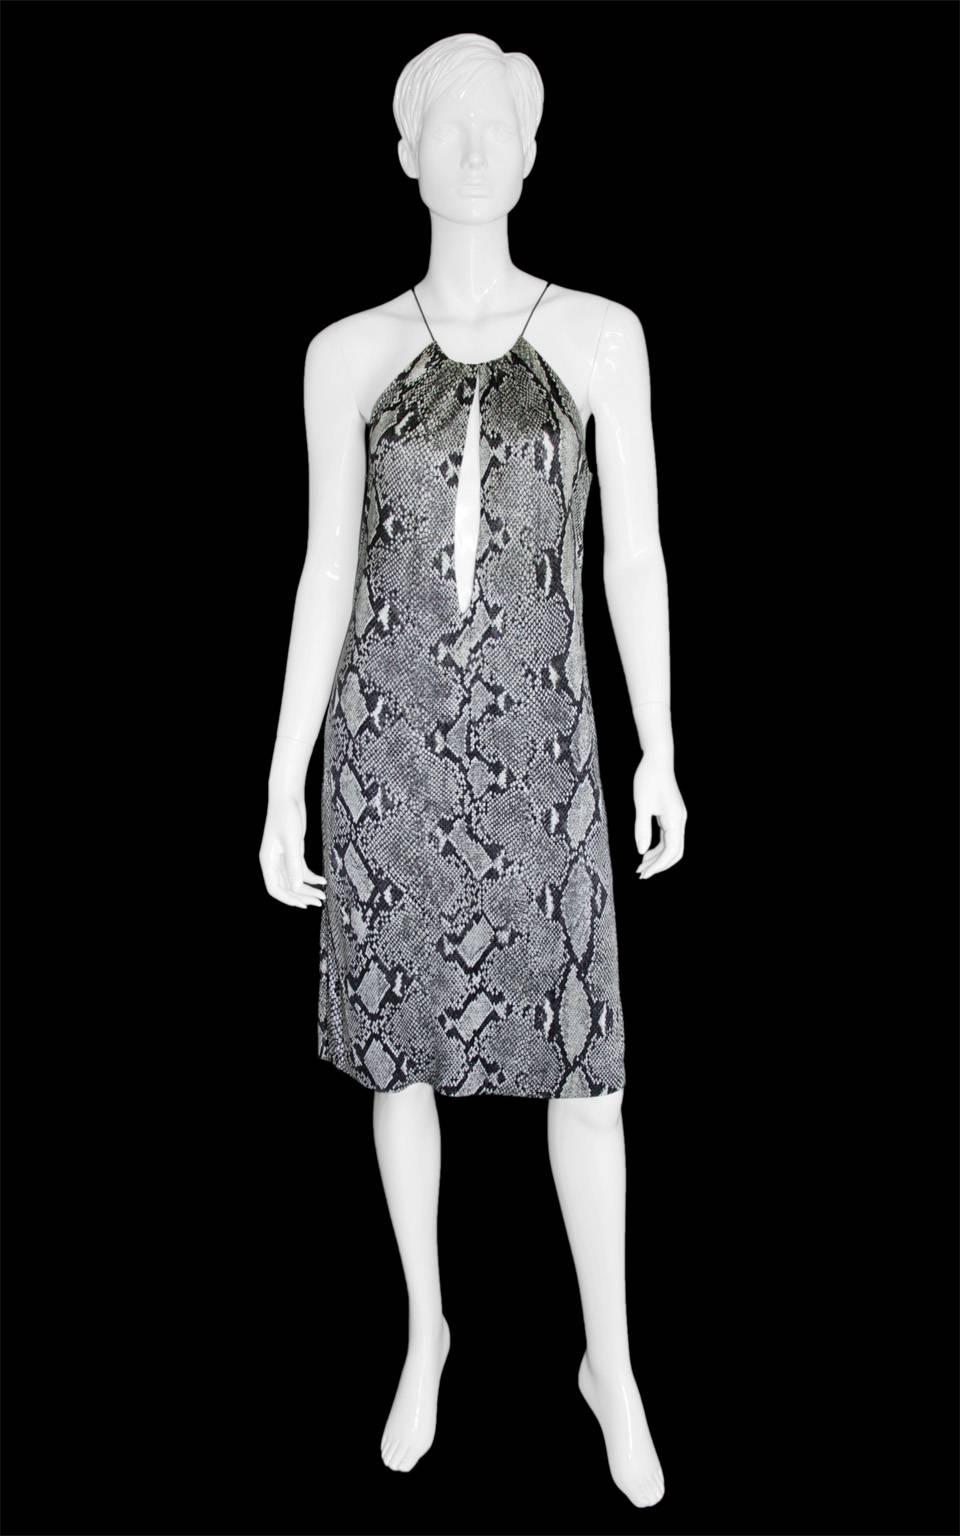 That amazing black & grey python print jersey dress from Tom Ford's gorgeous Spring/Summer 2000 Collection for Gucci! Considered one of the sexiest Tom Ford piece of all time, this utterly iconic dress is almost impossible to find today. This